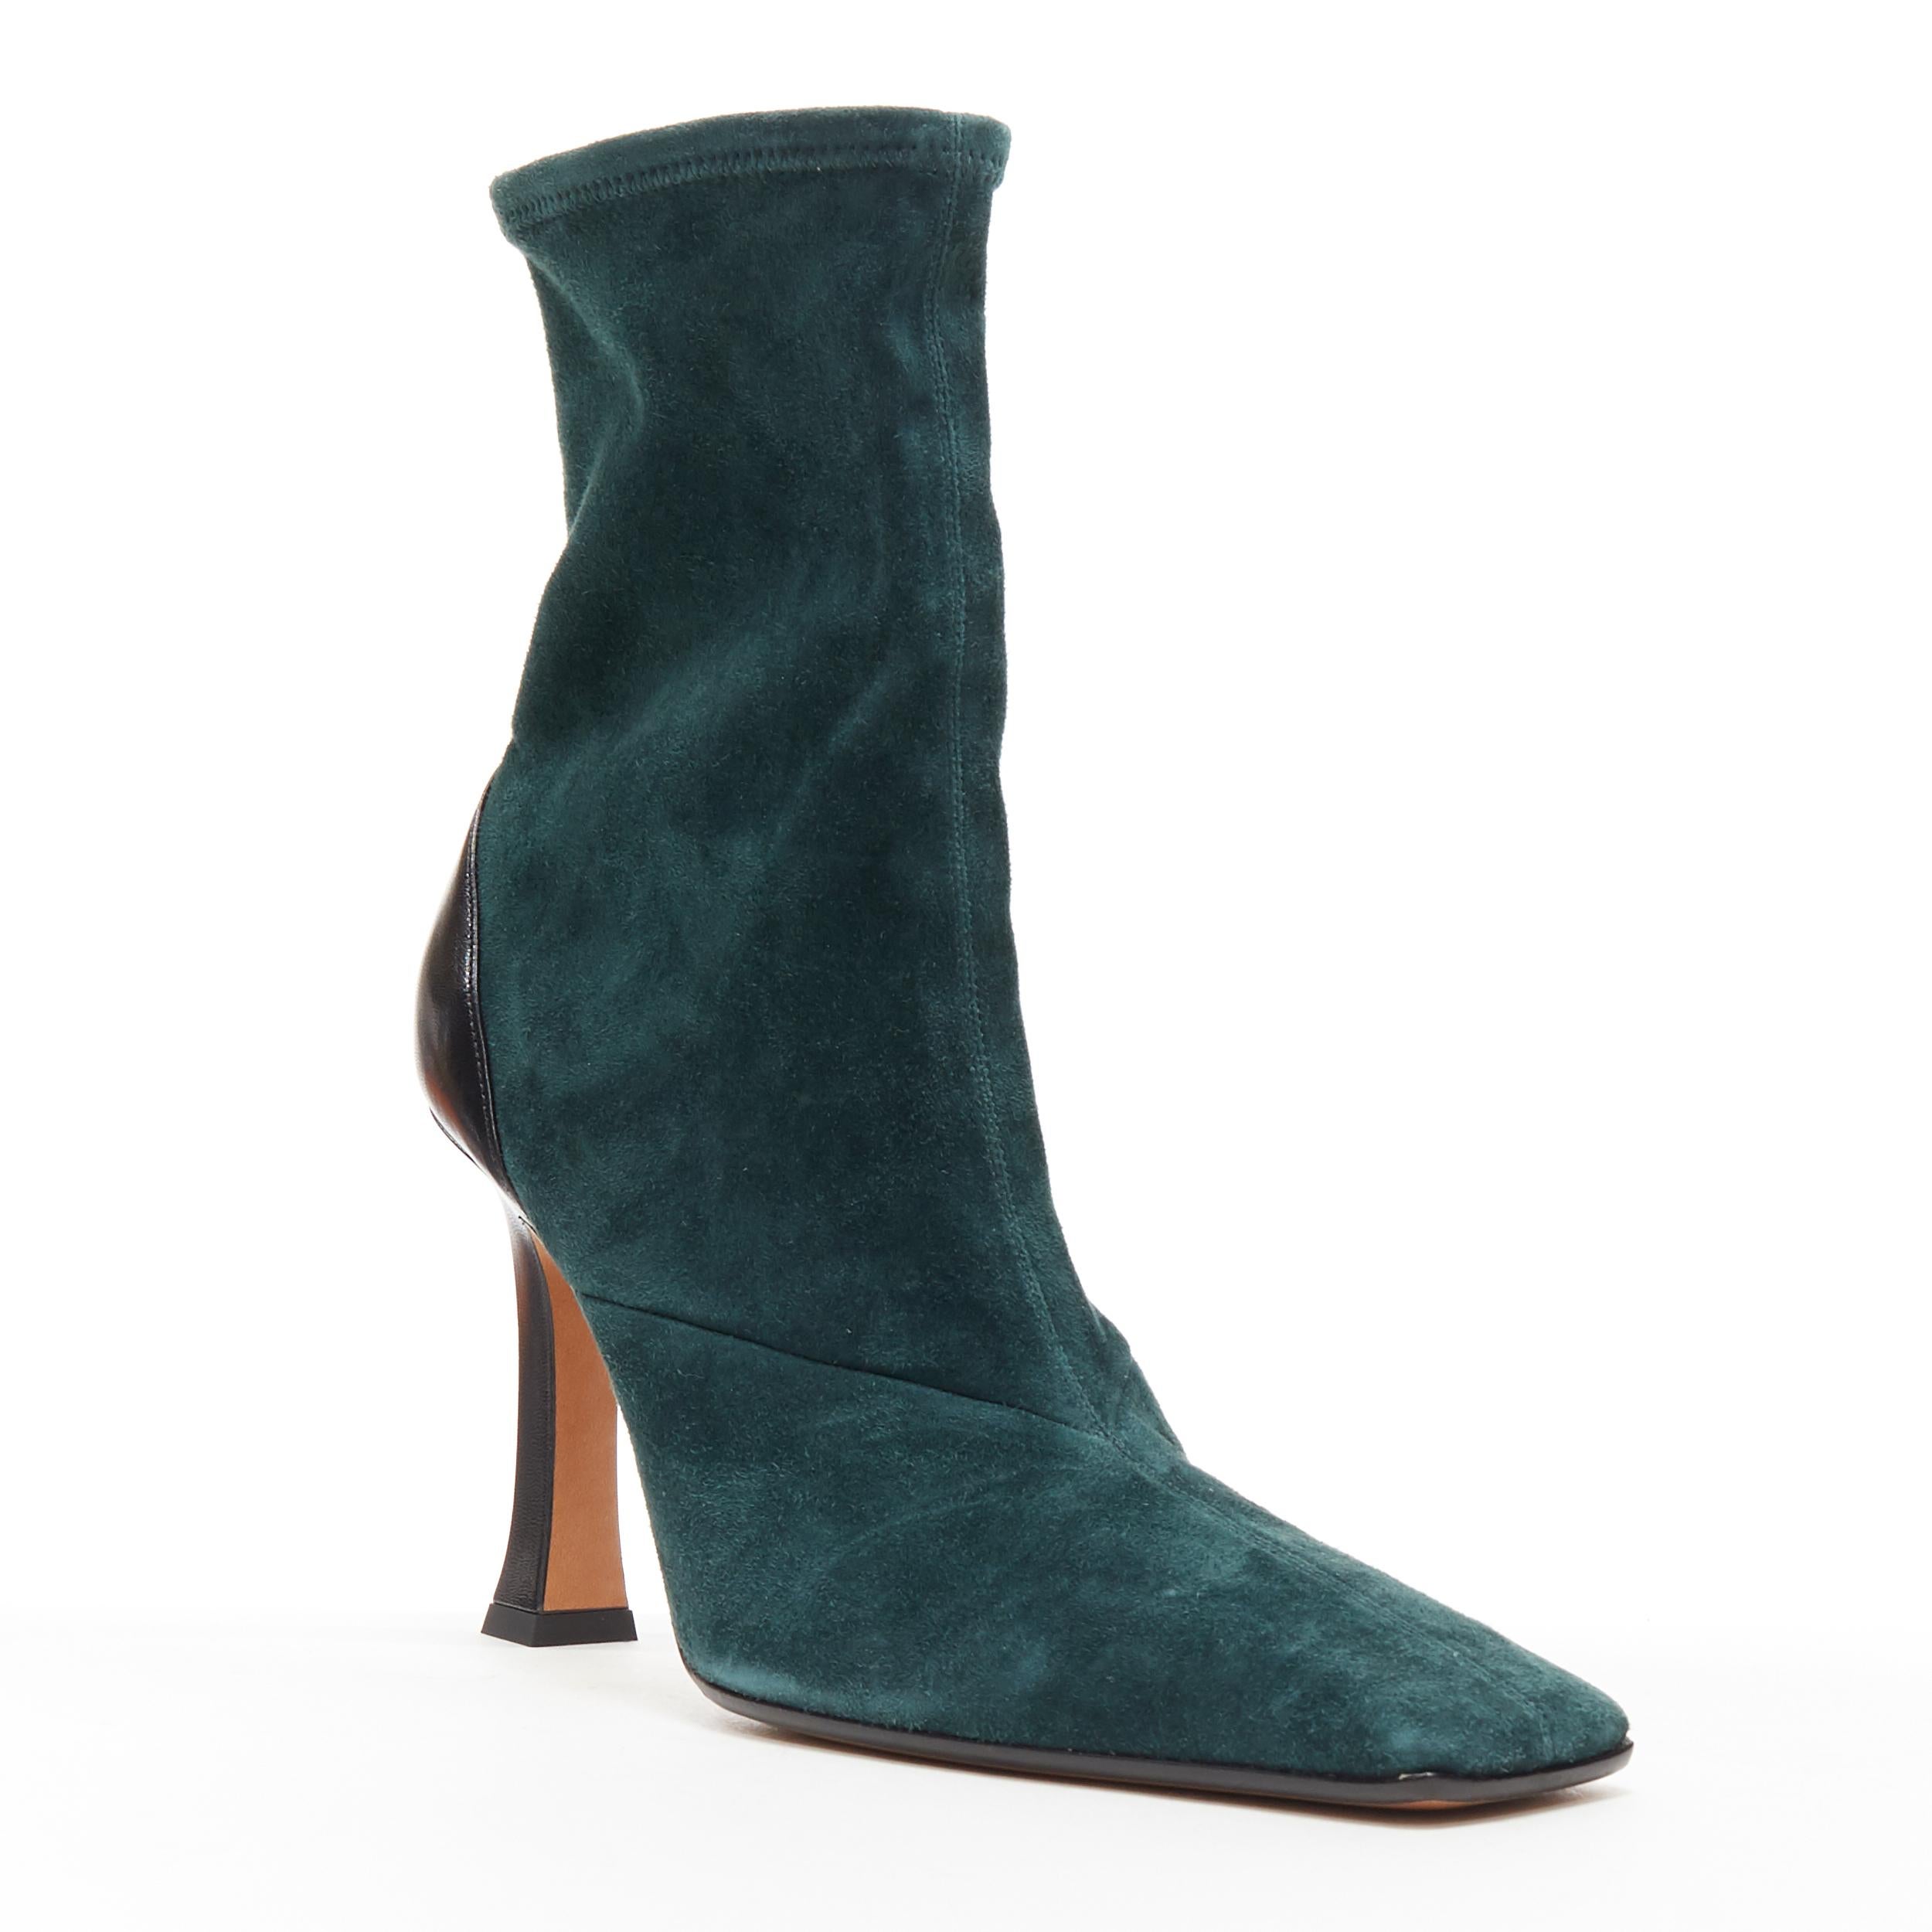 new OLD CELINE Madame Flare forest green stretch suede square toe bootie EU40
Brand: Celine
Designer: Phoebe Philo
Model Name / Style: Madame Flare
Material: Suede
Color: Green
Pattern: Solid
Closure: Zip
Extra Detail: High (3-3.9 in) heel height.